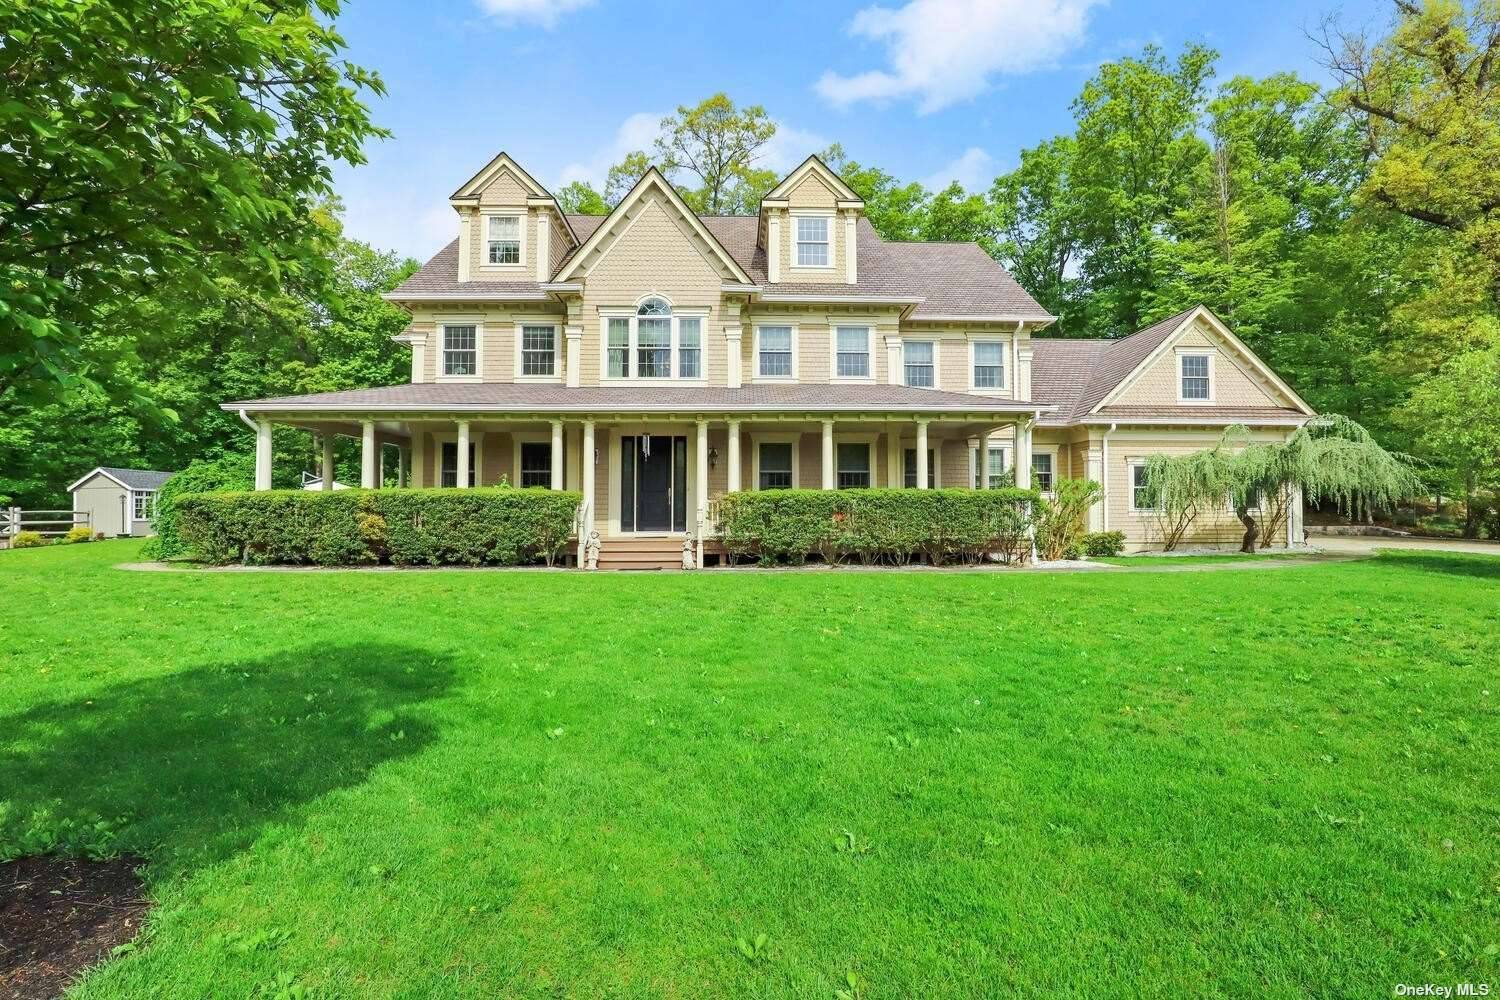 Amazing 6 bedroom 7 1 2 bath colonial features a dramatic formal entry, gorgeous crown, detailed hardwood floors, trey ceilings as well as French doors to a wrap around front ...